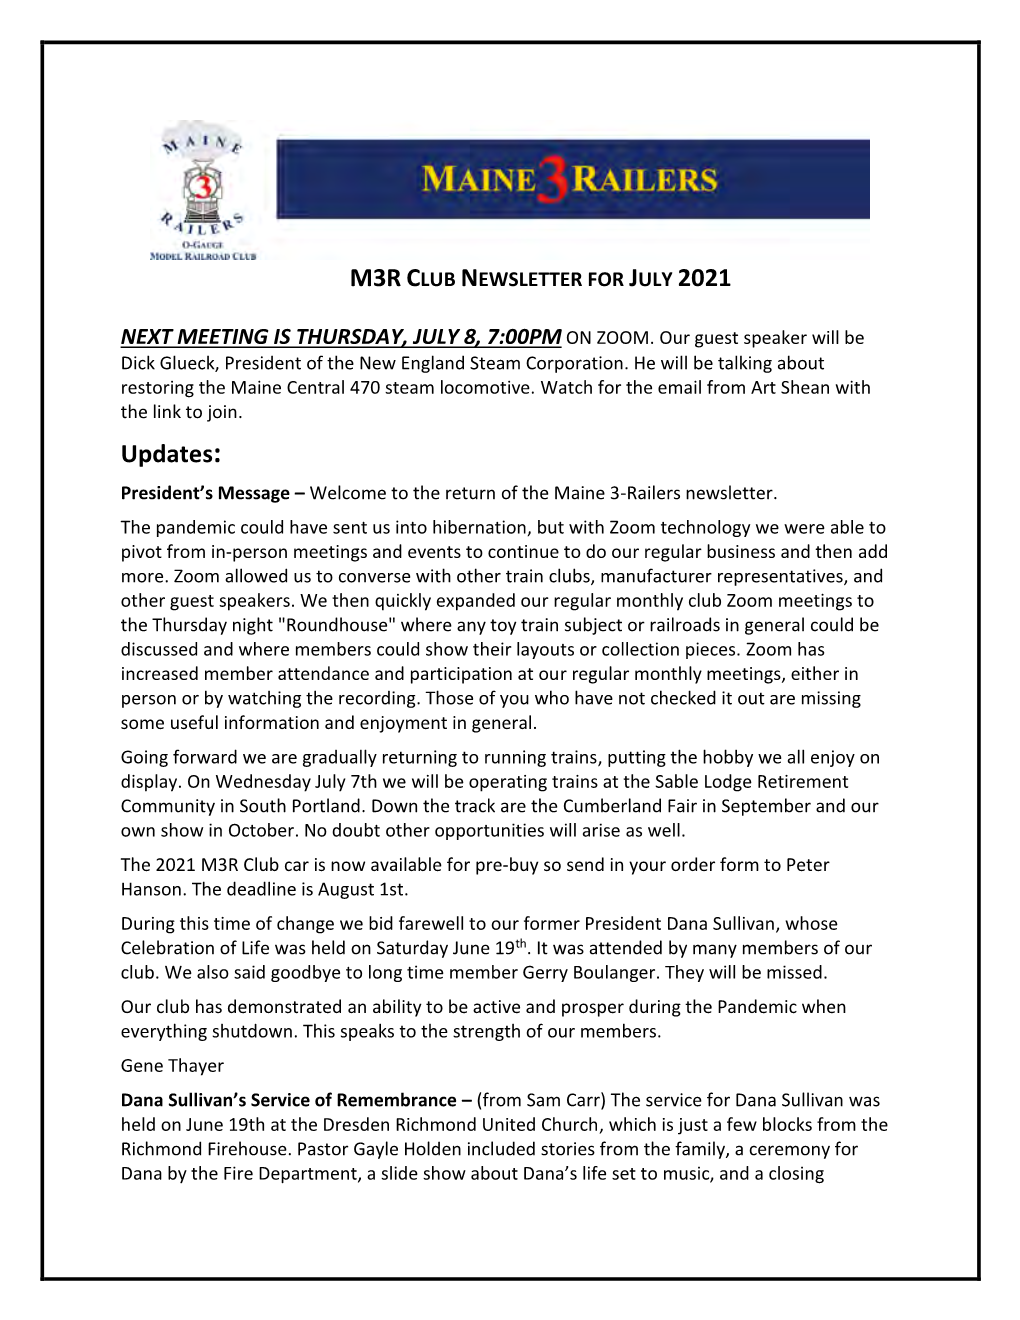 Updates: President’S Message – Welcome to the Return of the Maine 3-Railers Newsletter